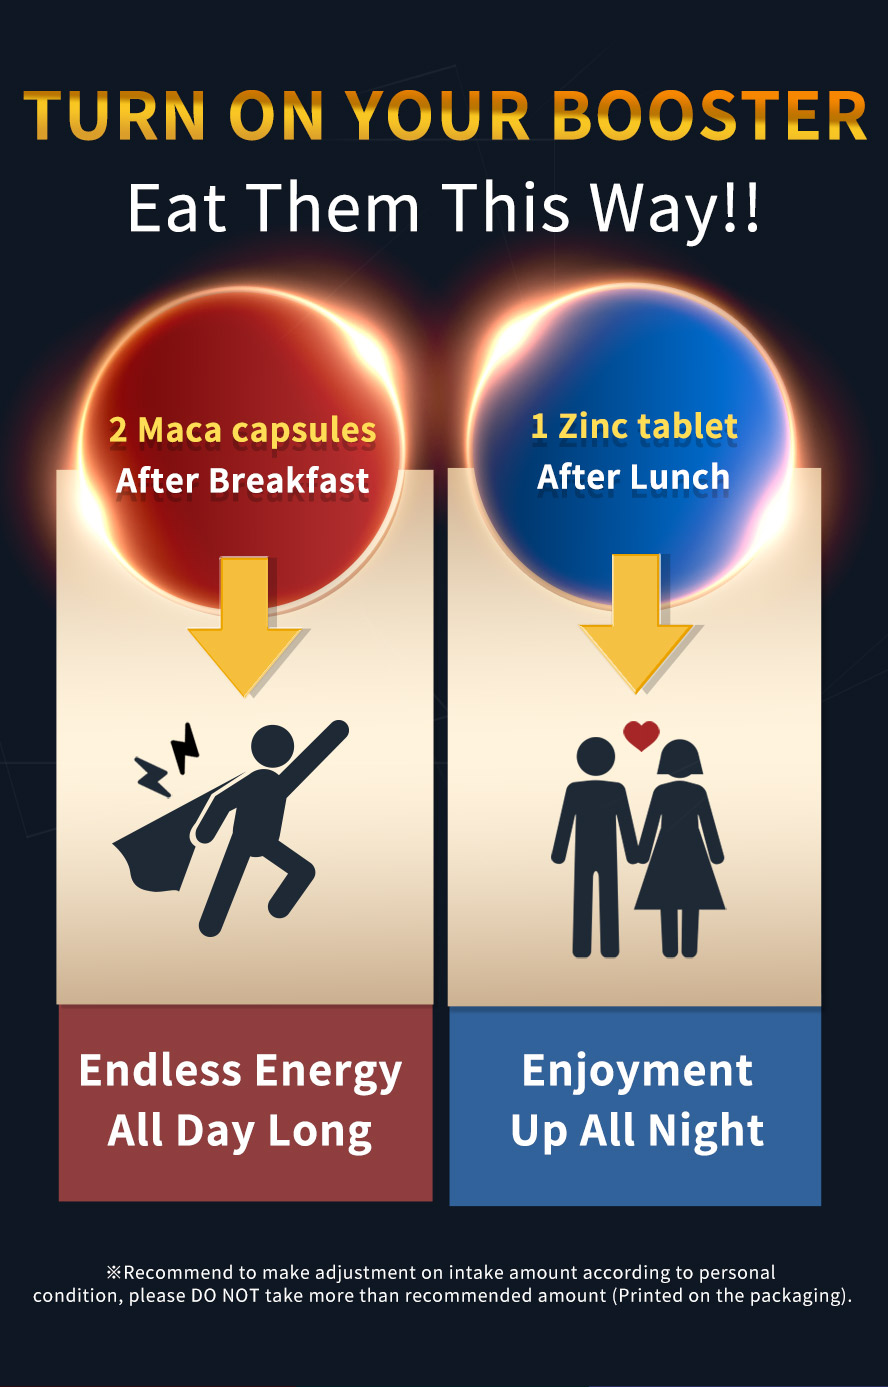 Maca and Zinc enhances men's ability to perform on bed, more energetic and vigorous